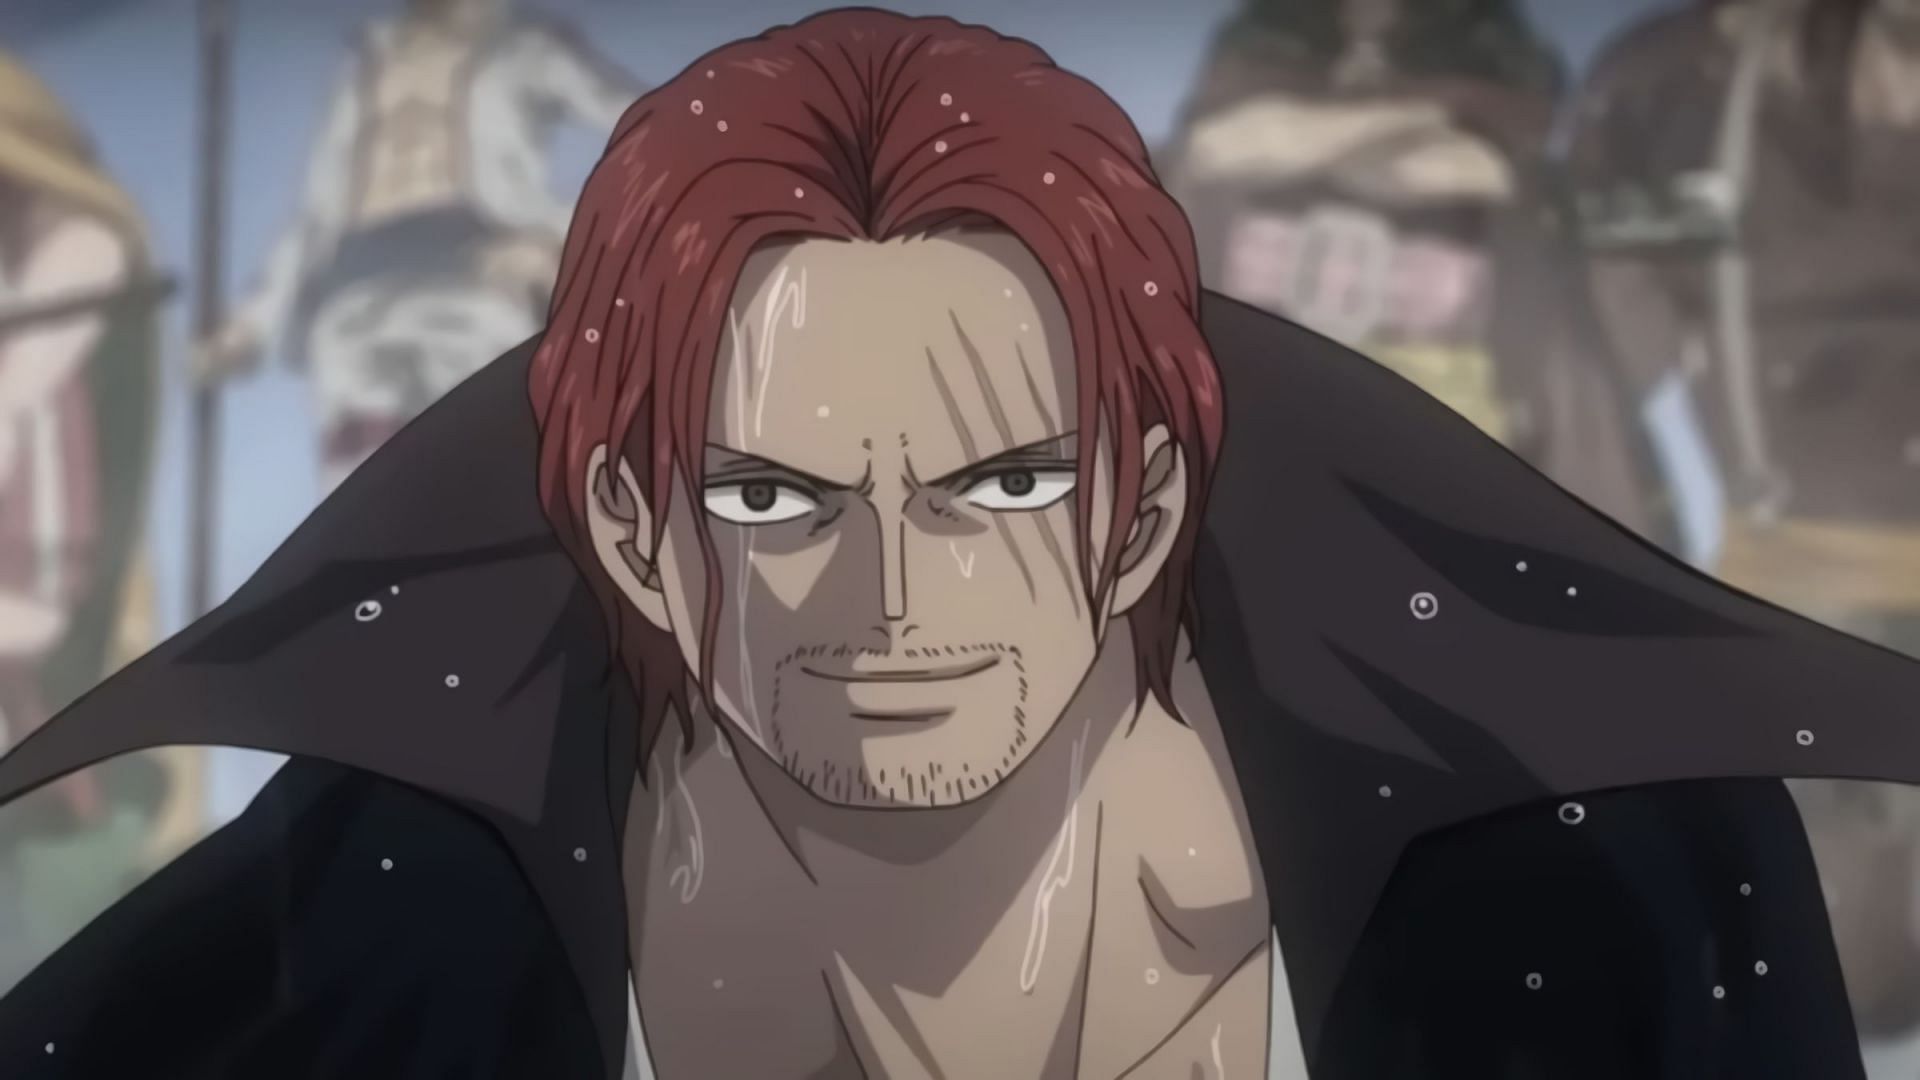 Shanks as seen in the series (Image via Toei Animation)